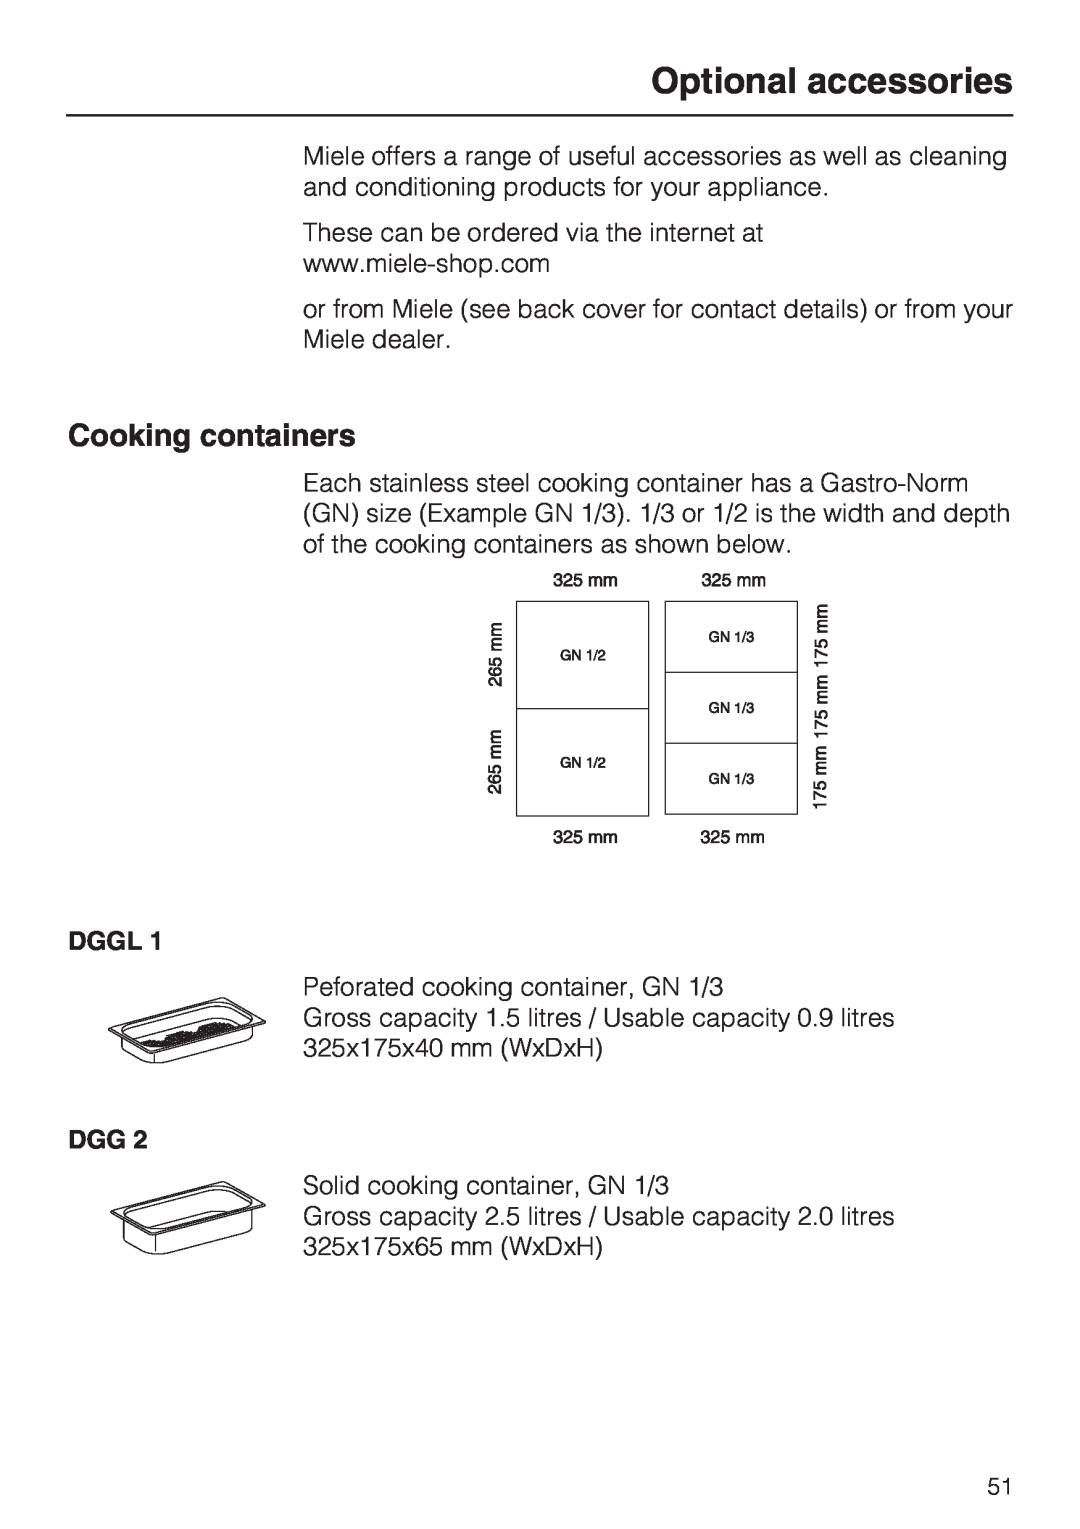 Miele DG 5070, DG 5088, DG 5080 installation instructions Optional accessories, Cooking containers 